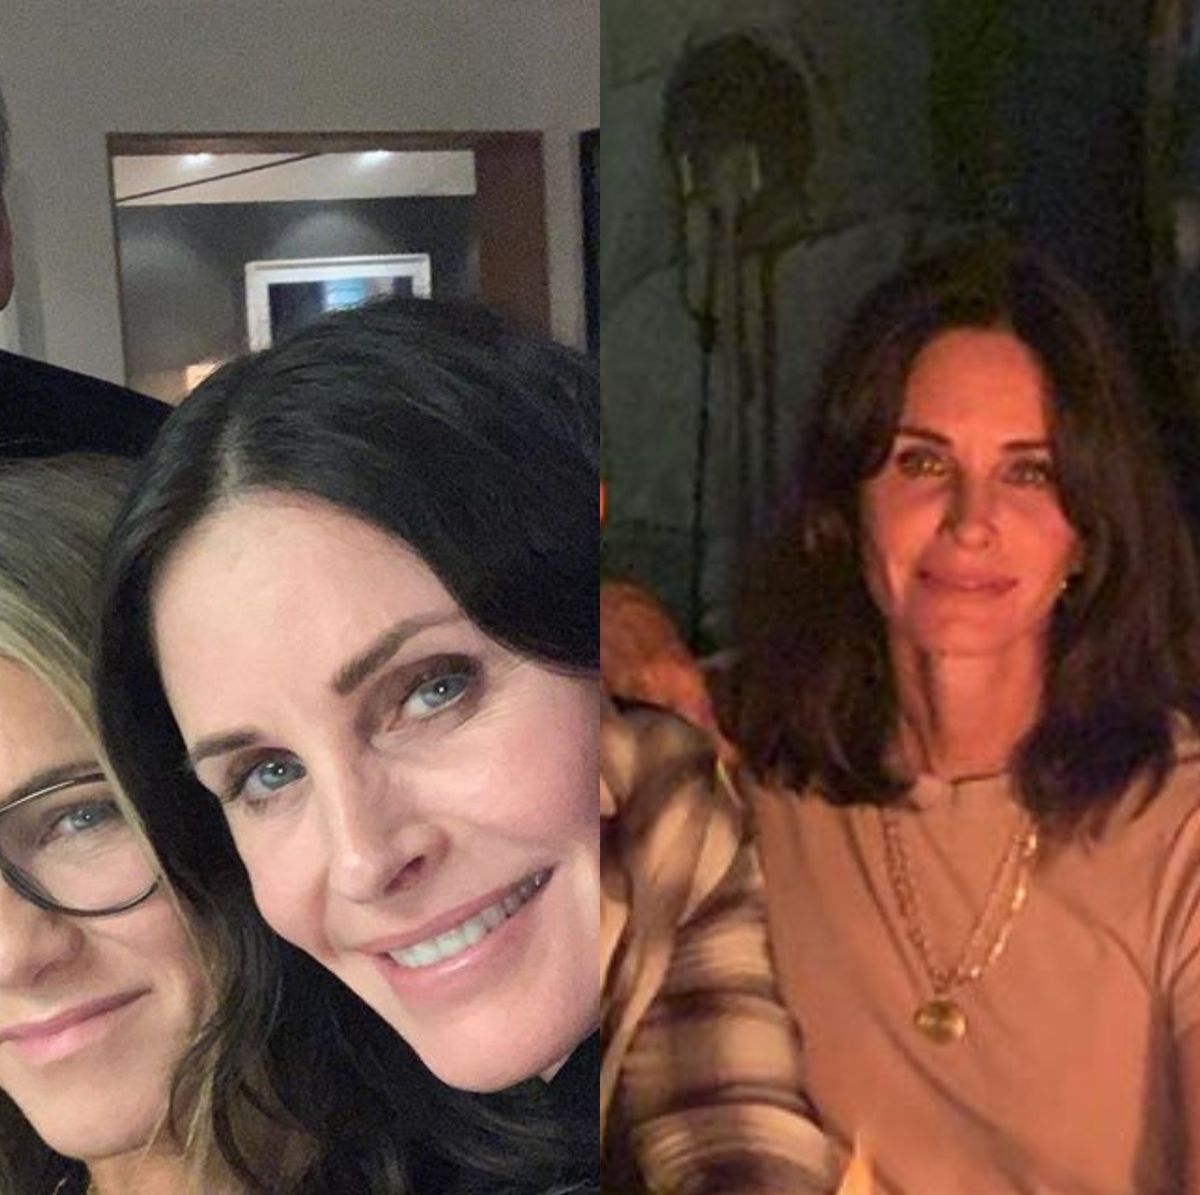 Courteney Cox Jennifer Aniston - The Cast Of Friends Had Dinner Together At Courteney Cox's House